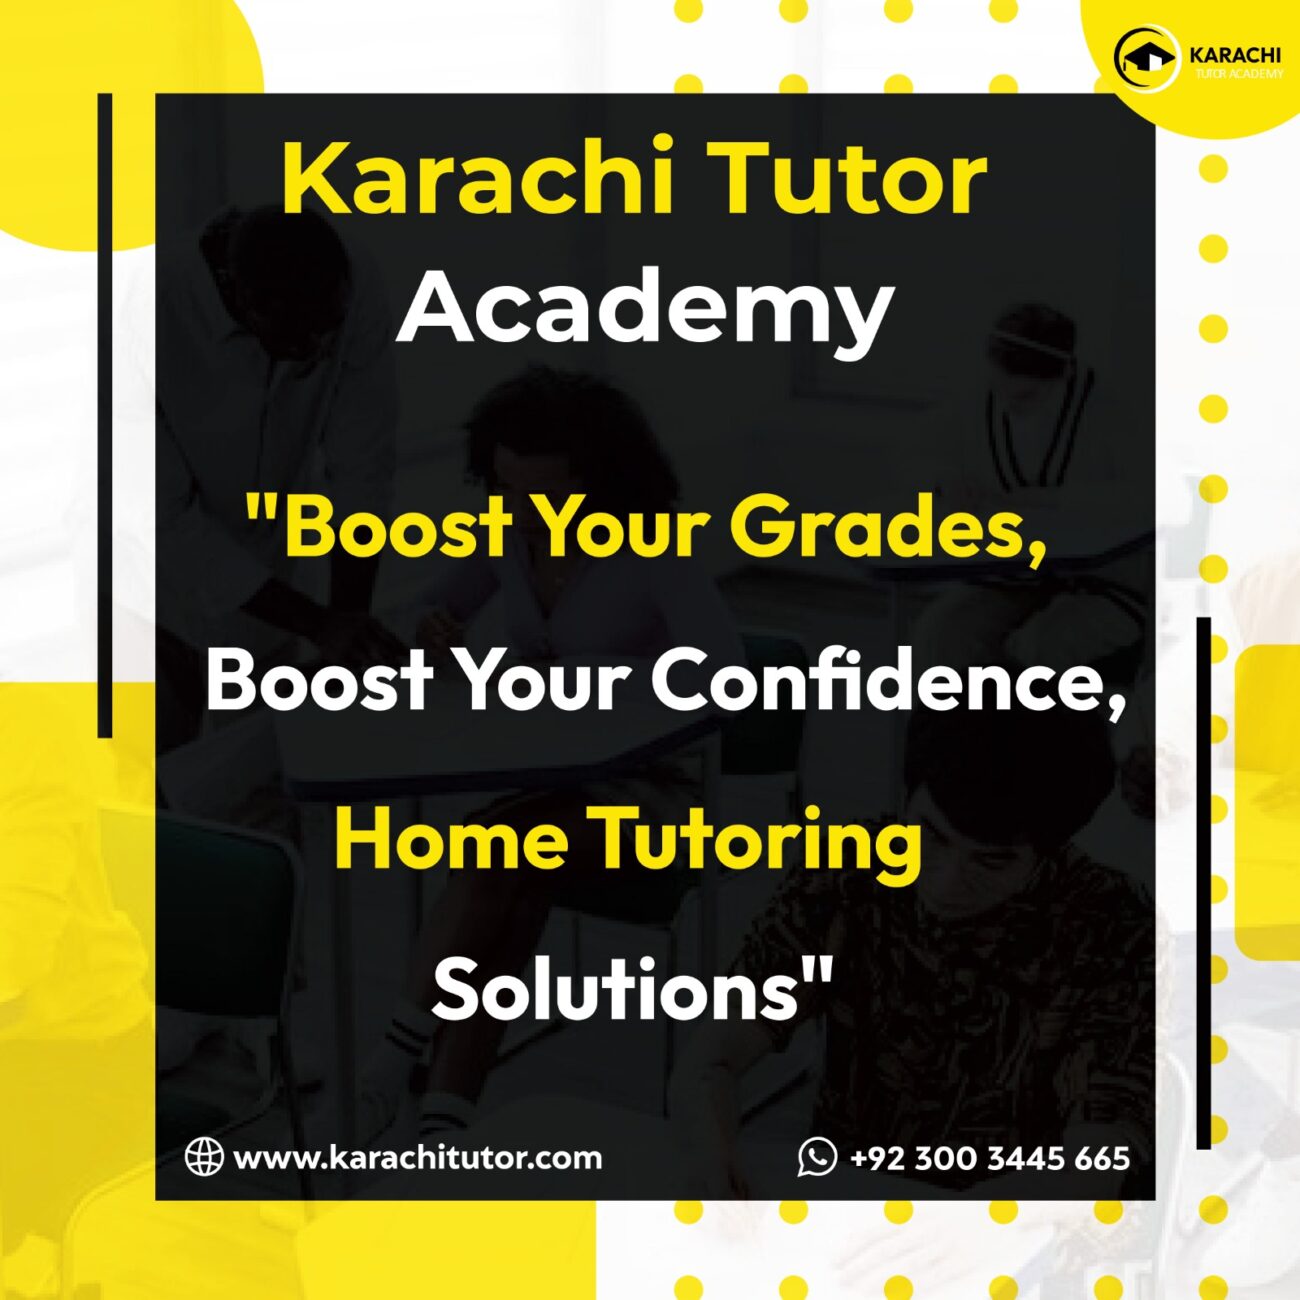 5 Reasons Why Hiring a Home Tutor in Karachi is Beneficial for Your Child's Education